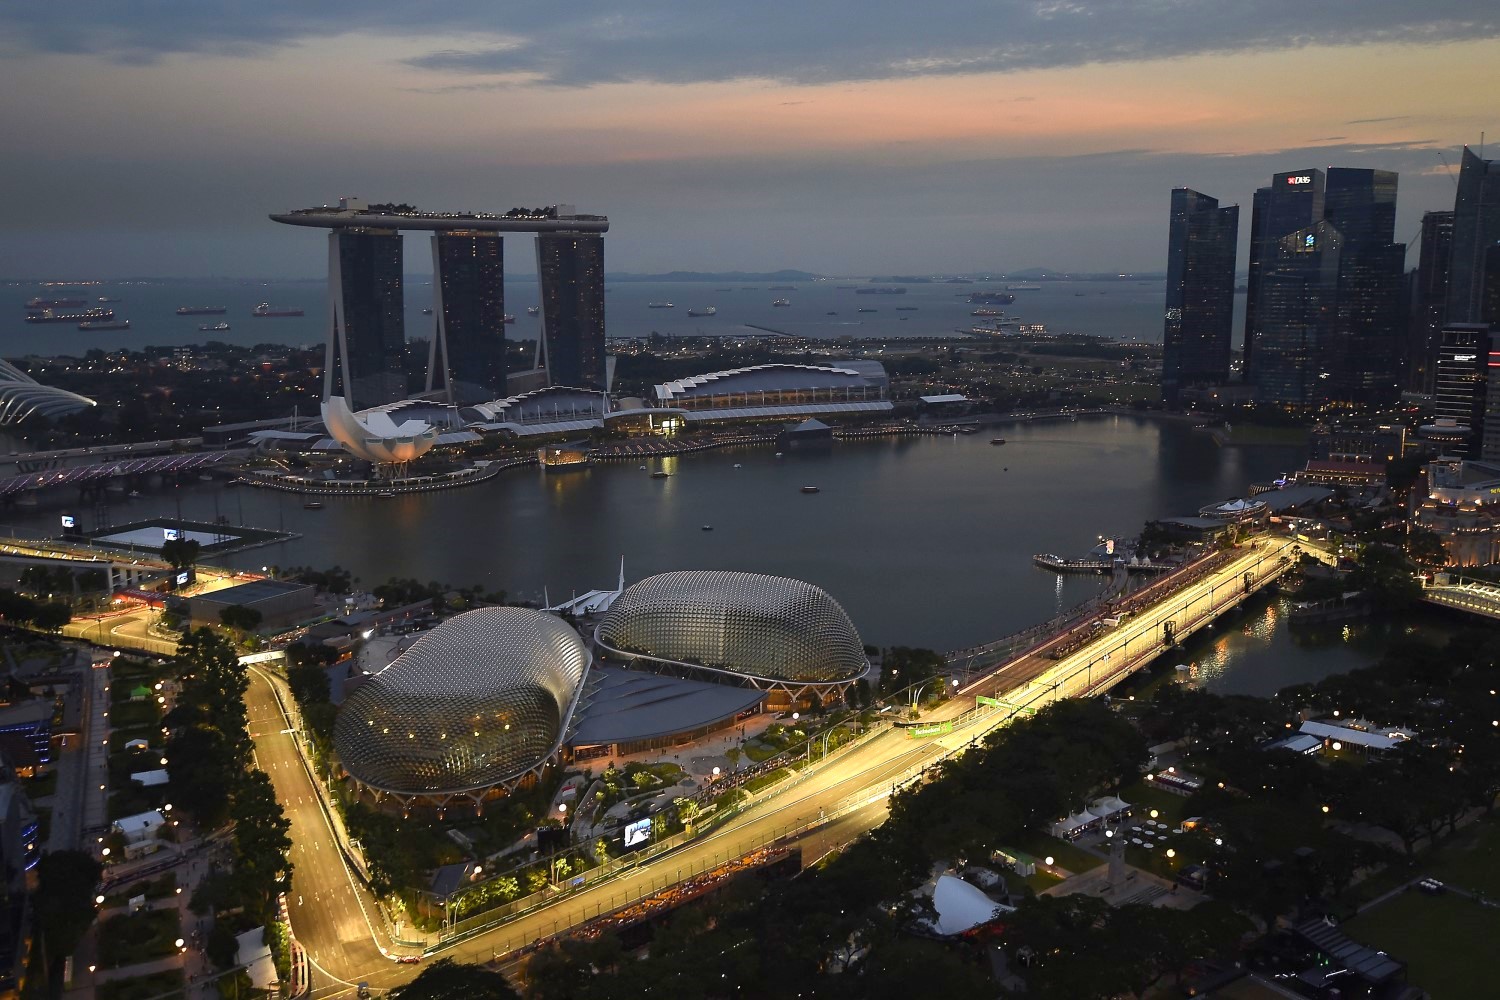 The Singapore GP is great but it is a huge financial disaster